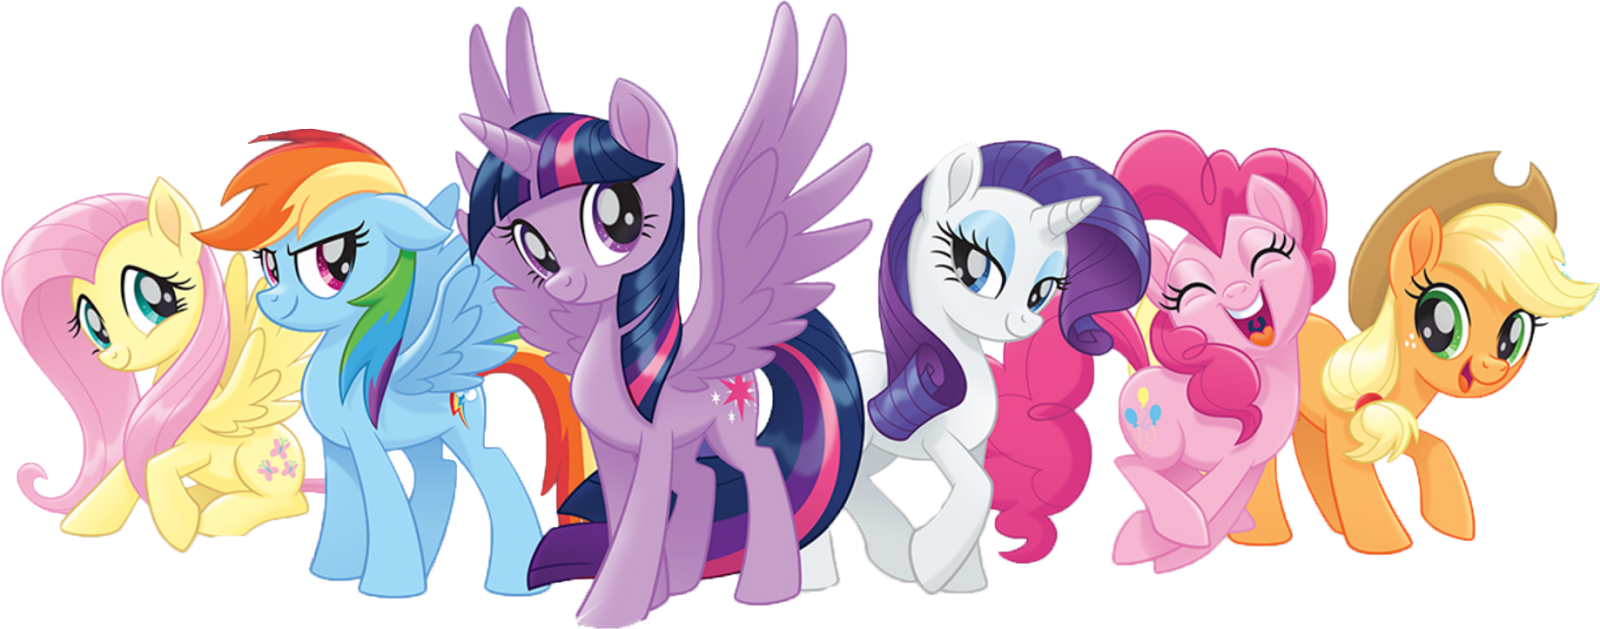 My Little Pony Characters PNG Image